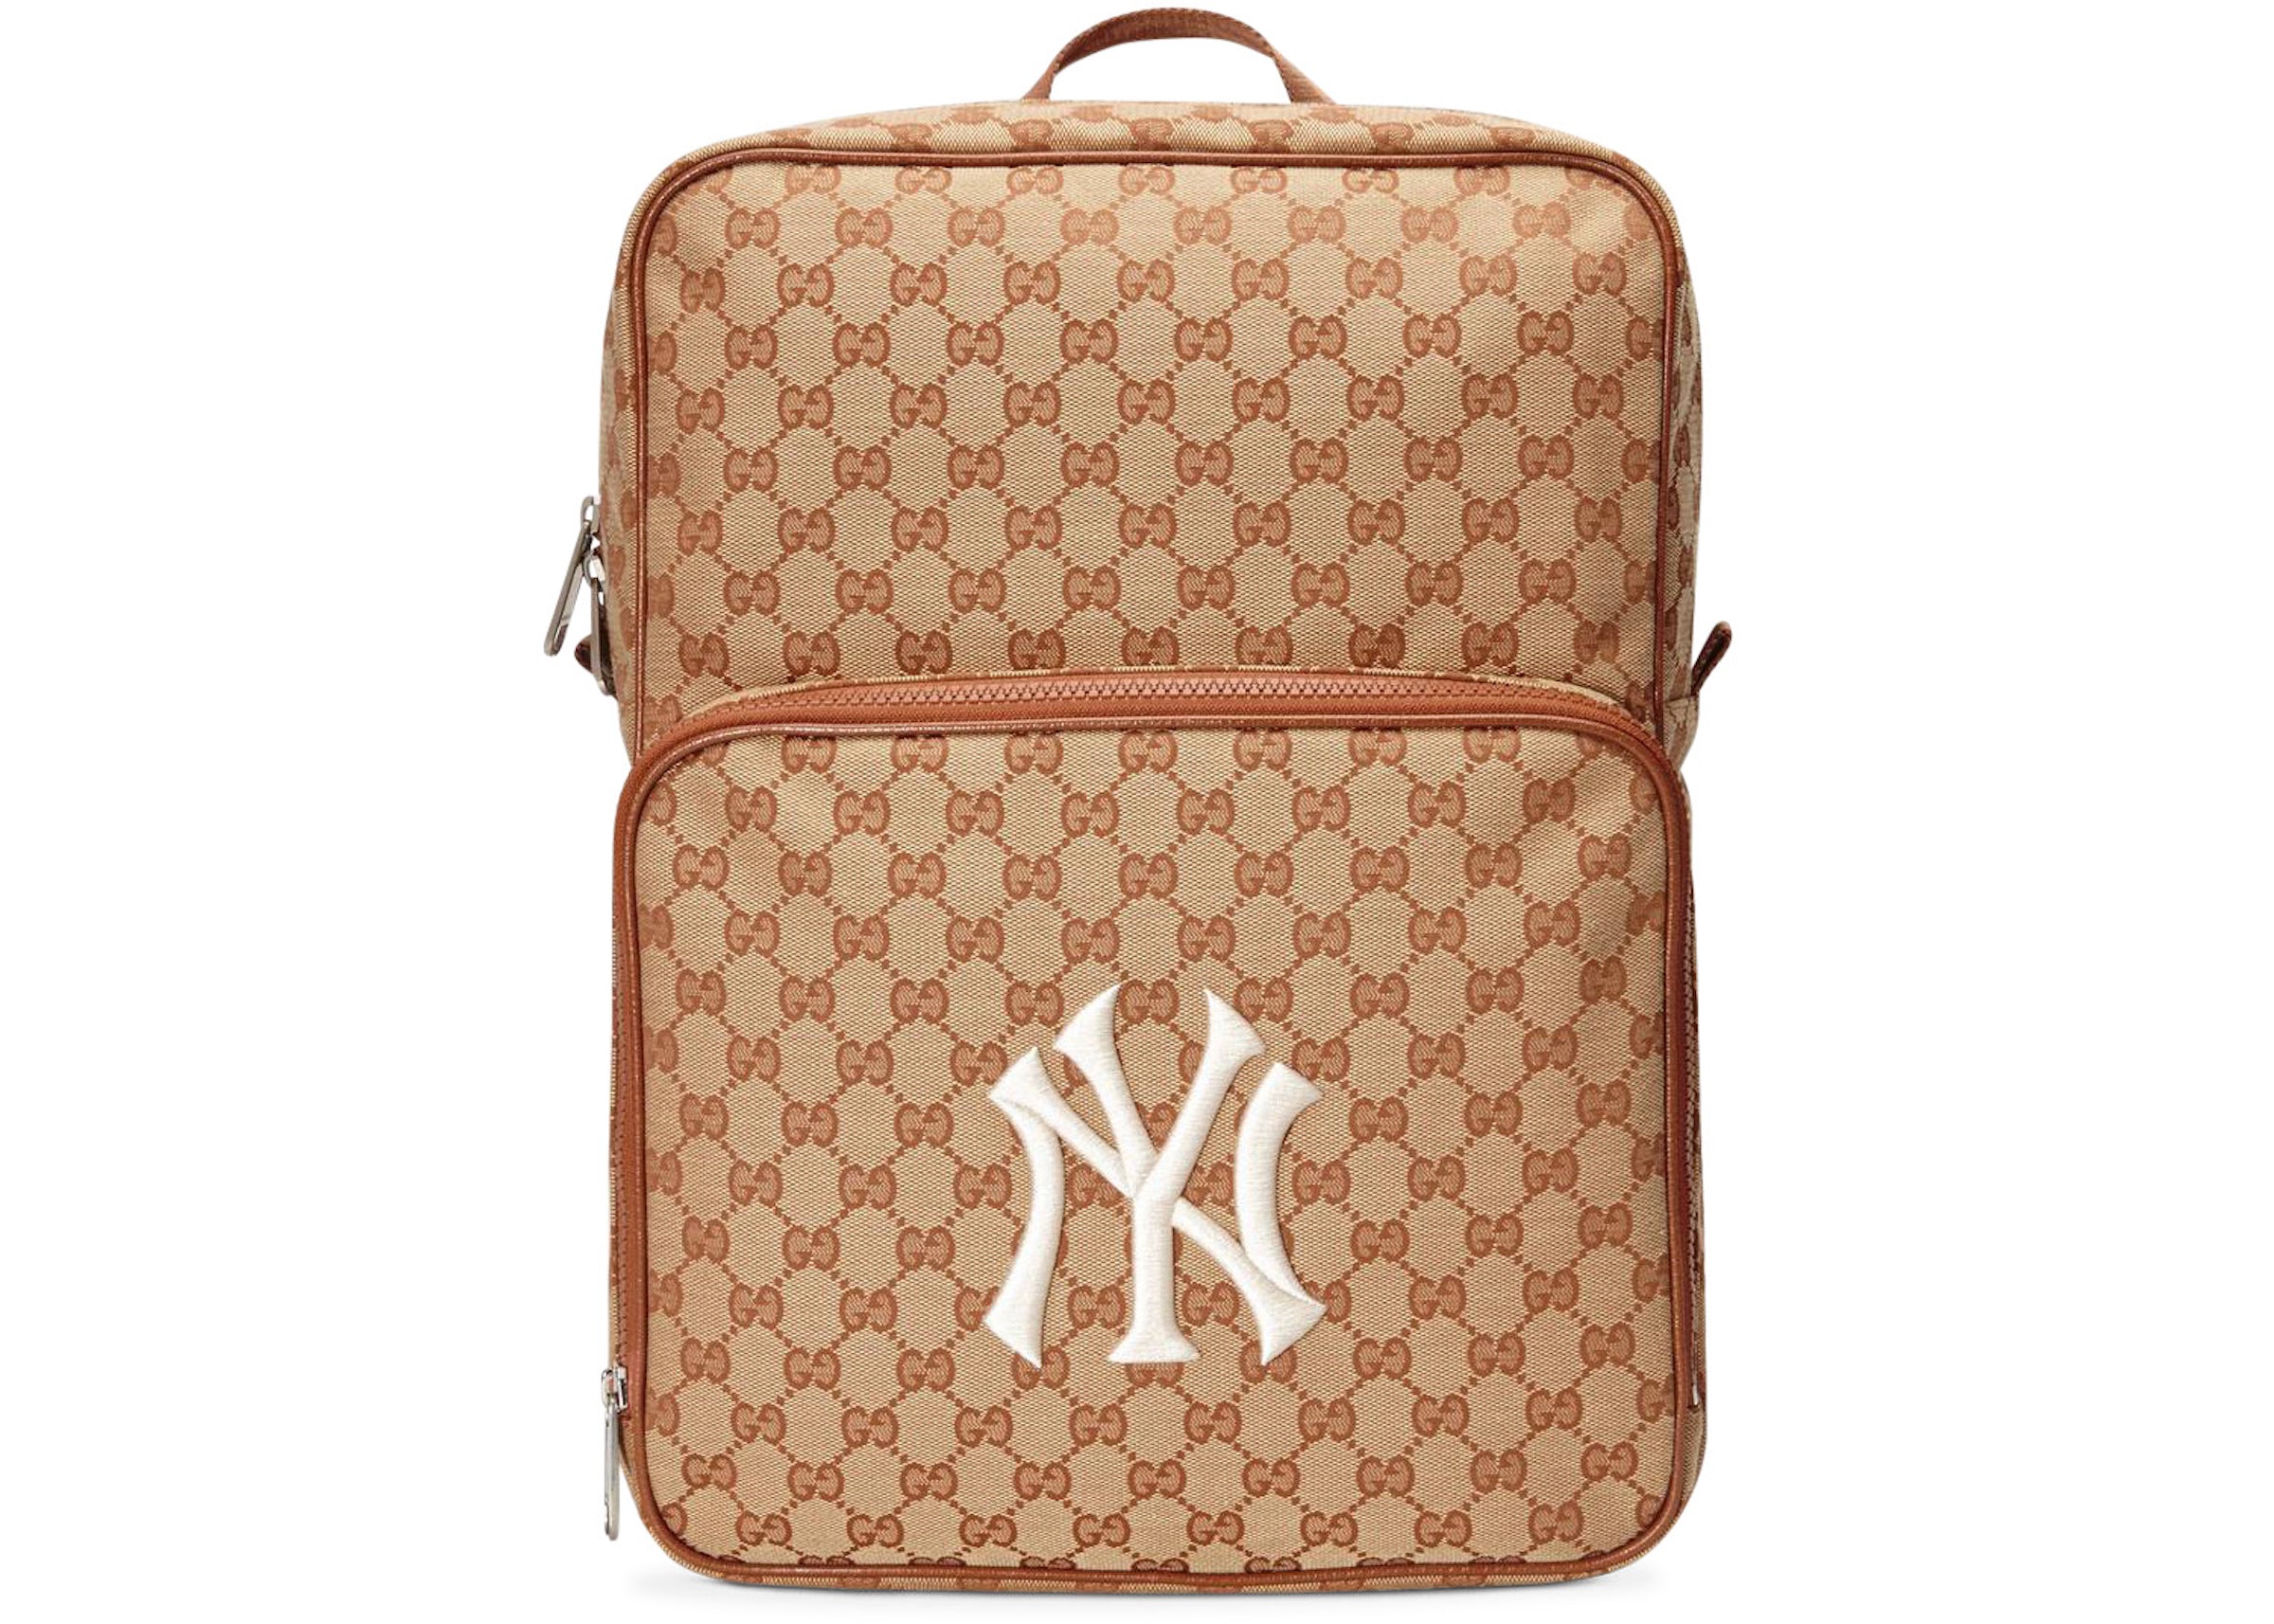 Gucci Backpack NY Yankees Medium Brick Red/Beige in Canvas with